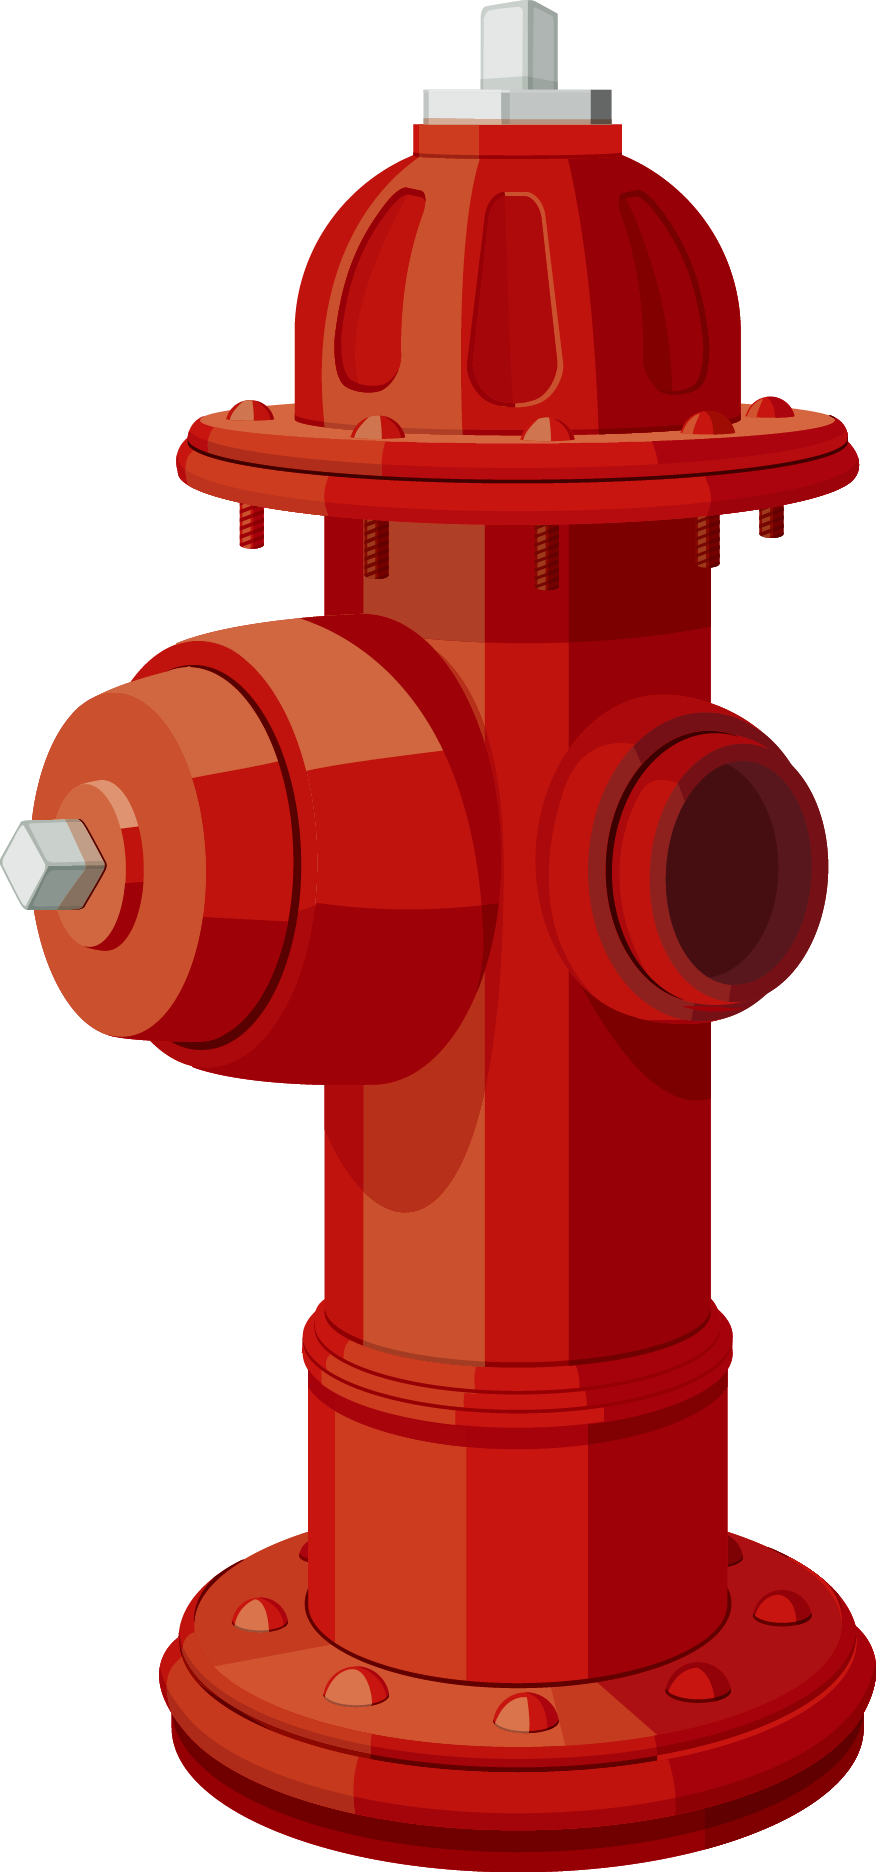 Red Fire Hydrant Vector Illustration PNG